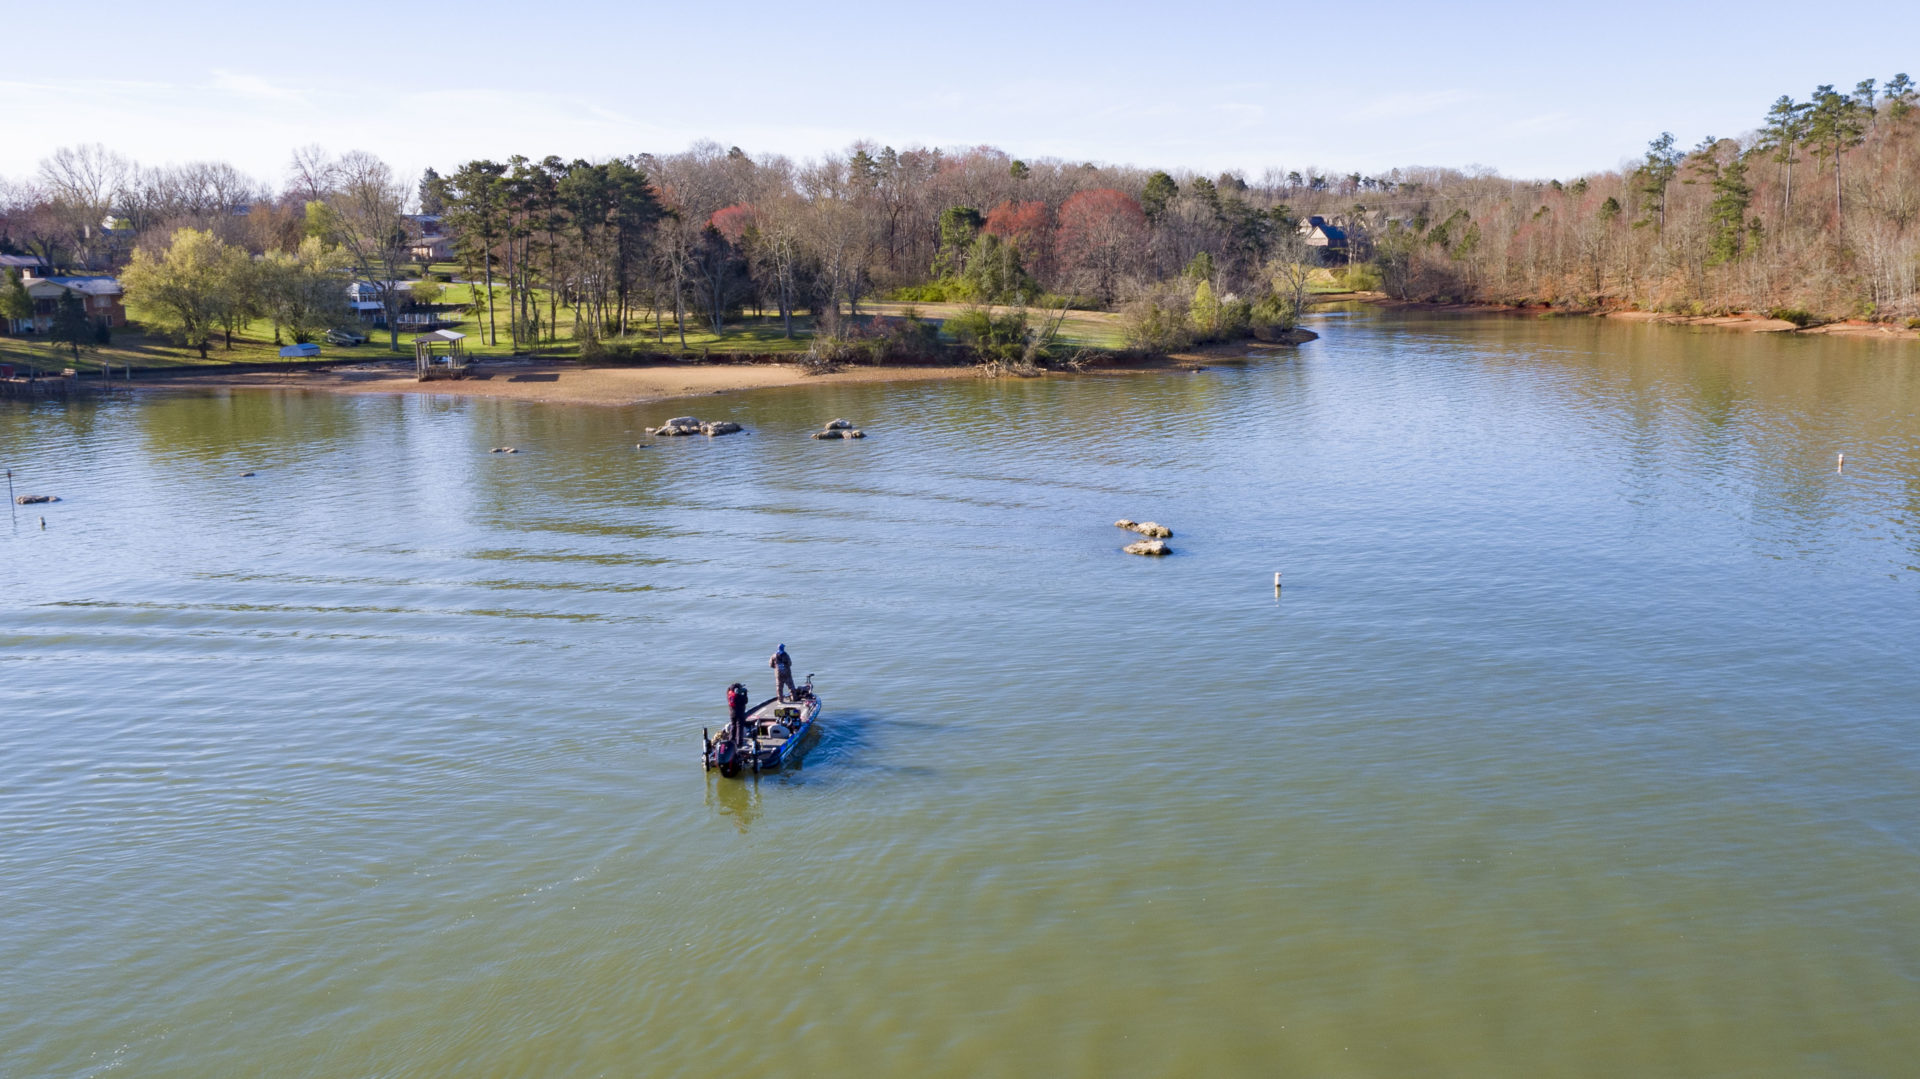 Drone shot of bass boat in the lake at the 2019 Bassmaster Classic